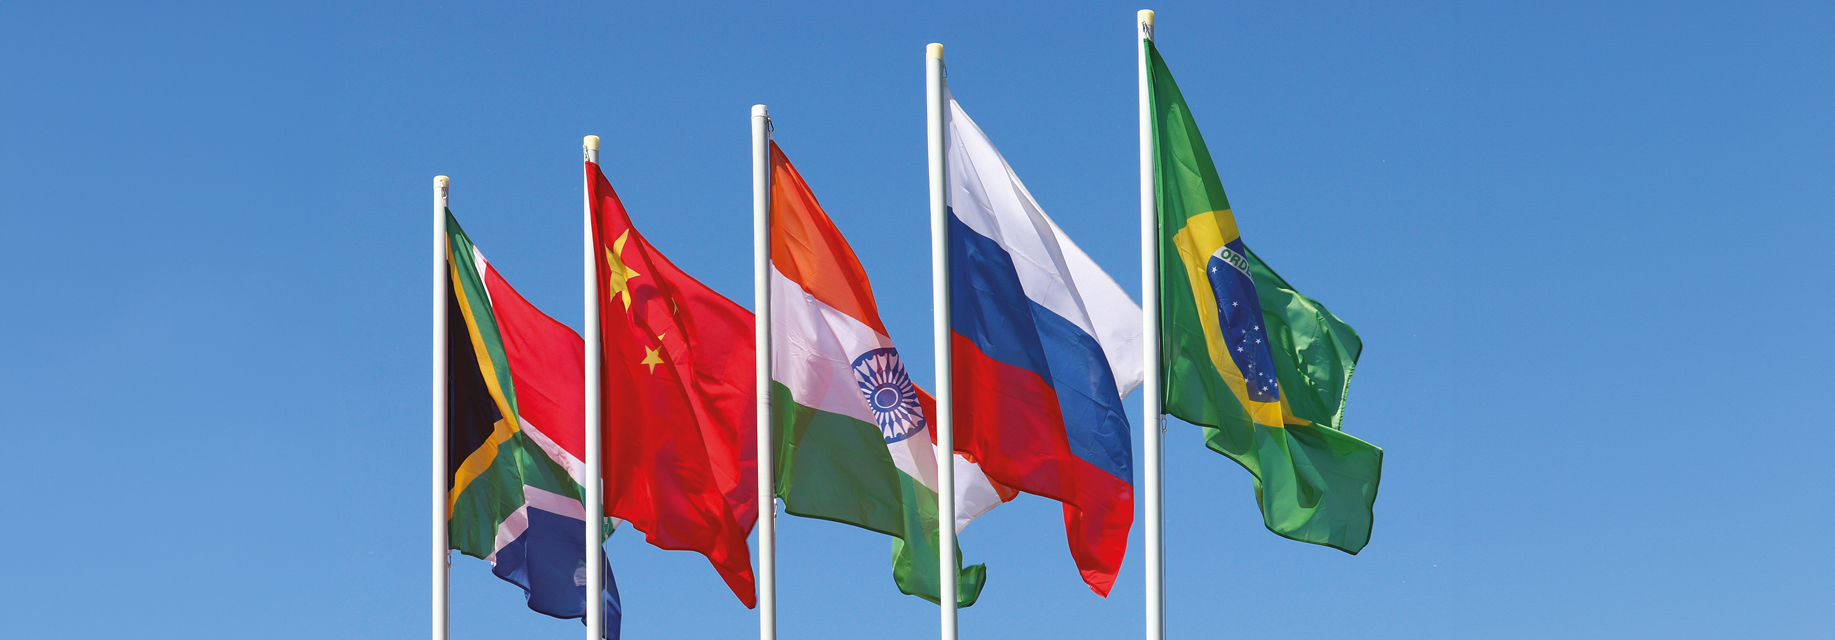 BRICS & the West: What to Expect in the Next Decade